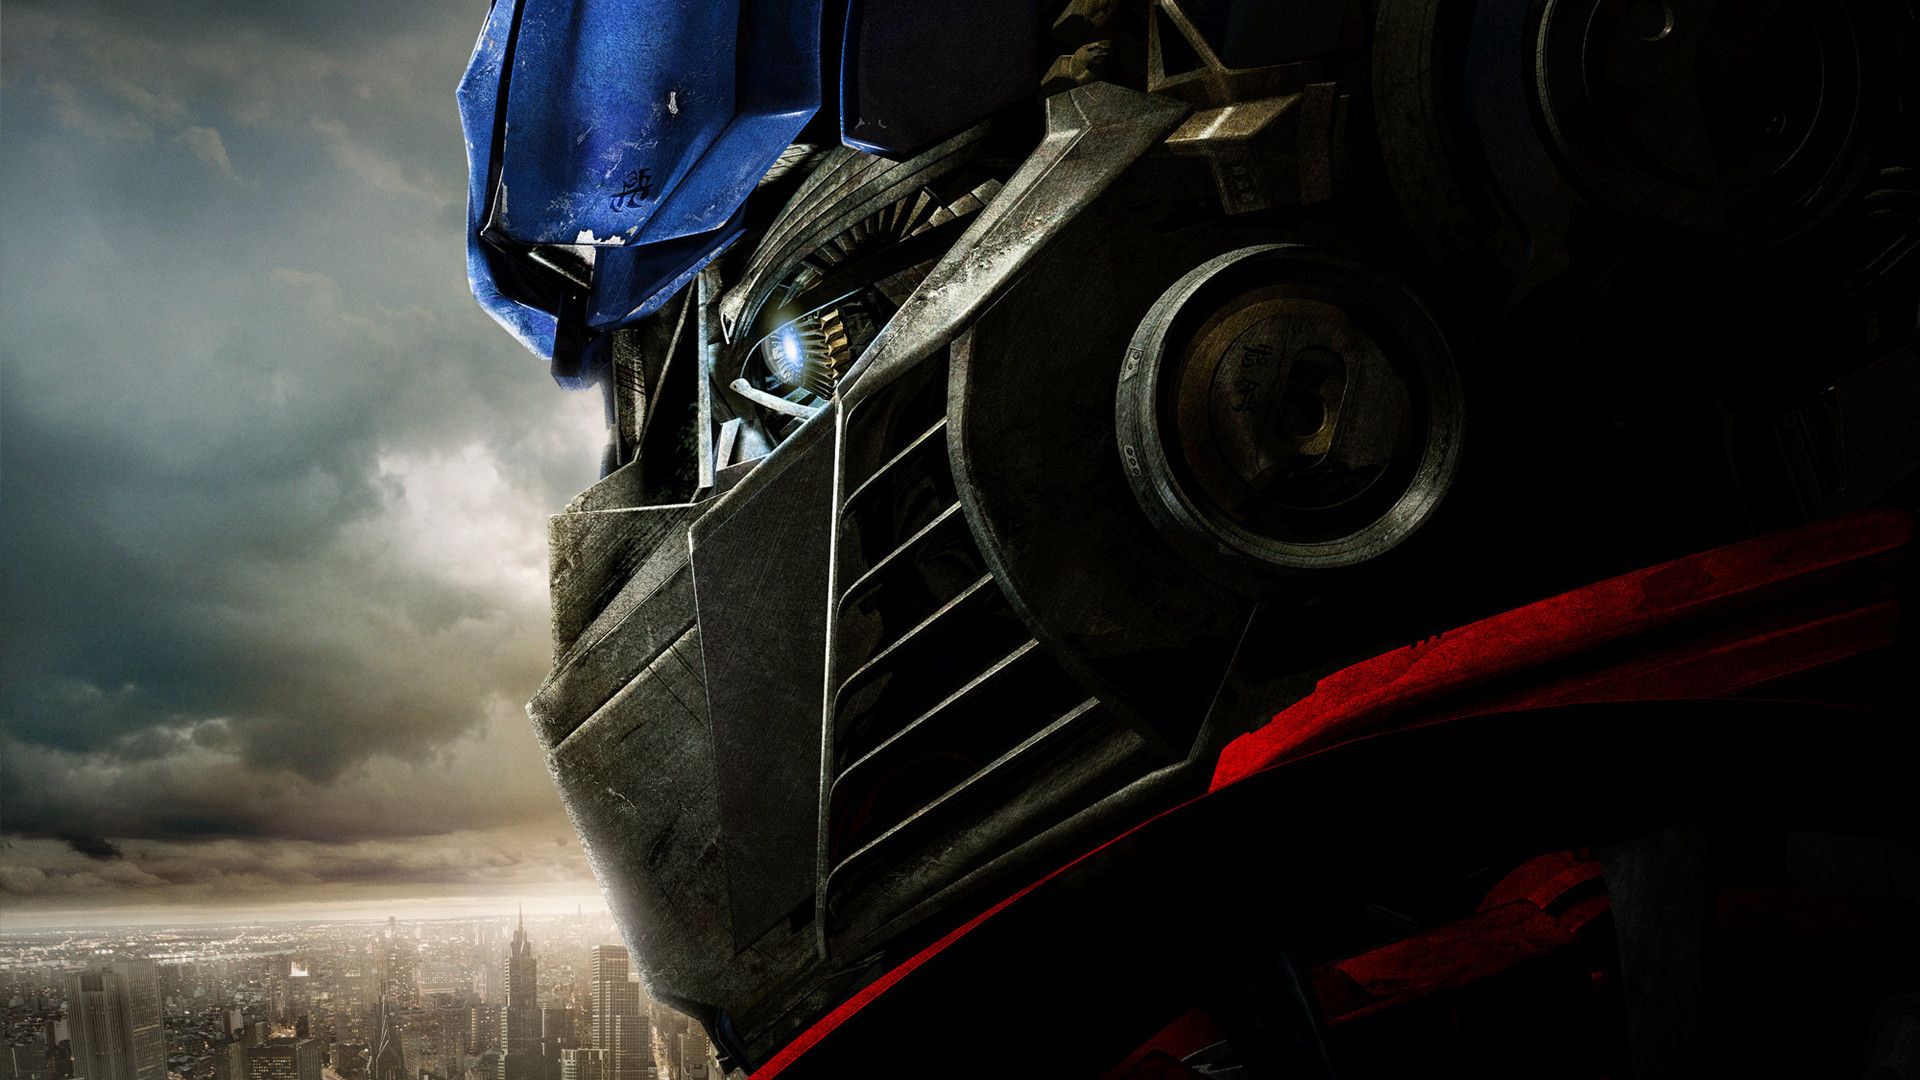 Transformers background